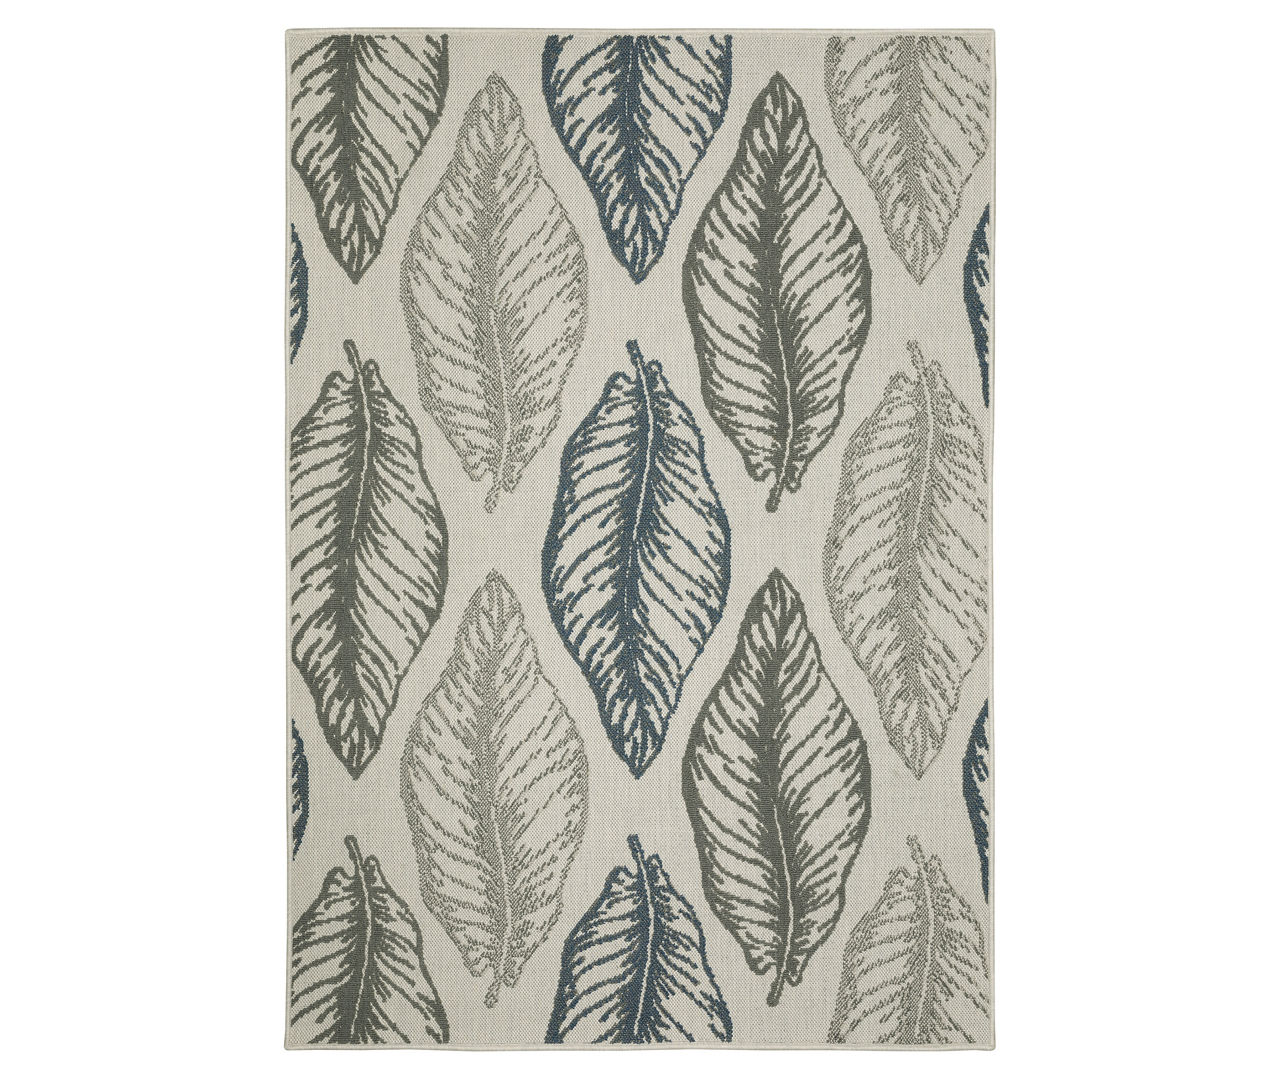 Torian Beige, Green & Blue Leaves Outdoor Area Rug, (5.3' x 7.3')